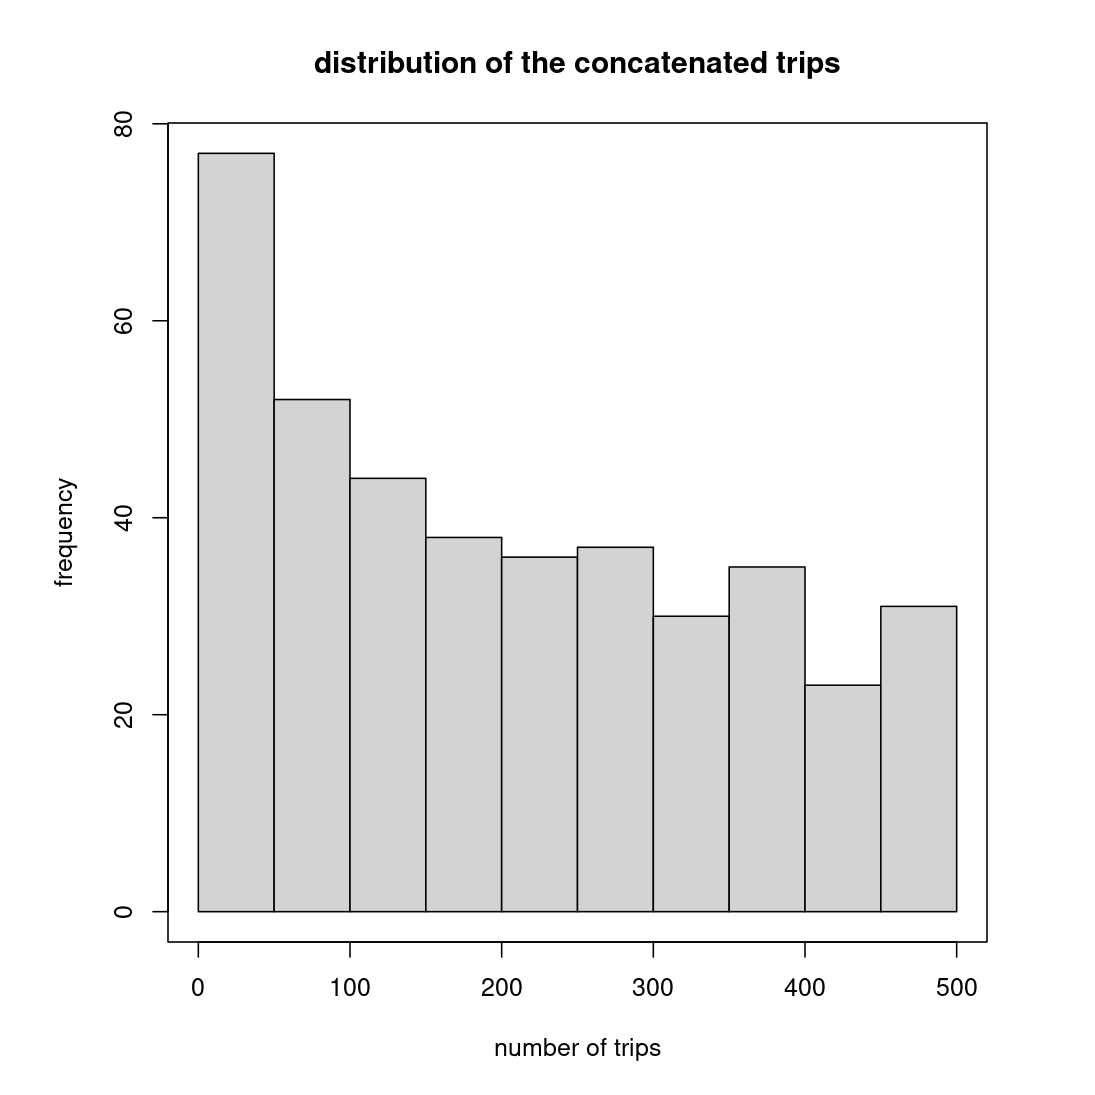 The distribution of pre-processed trips in (0, 500)